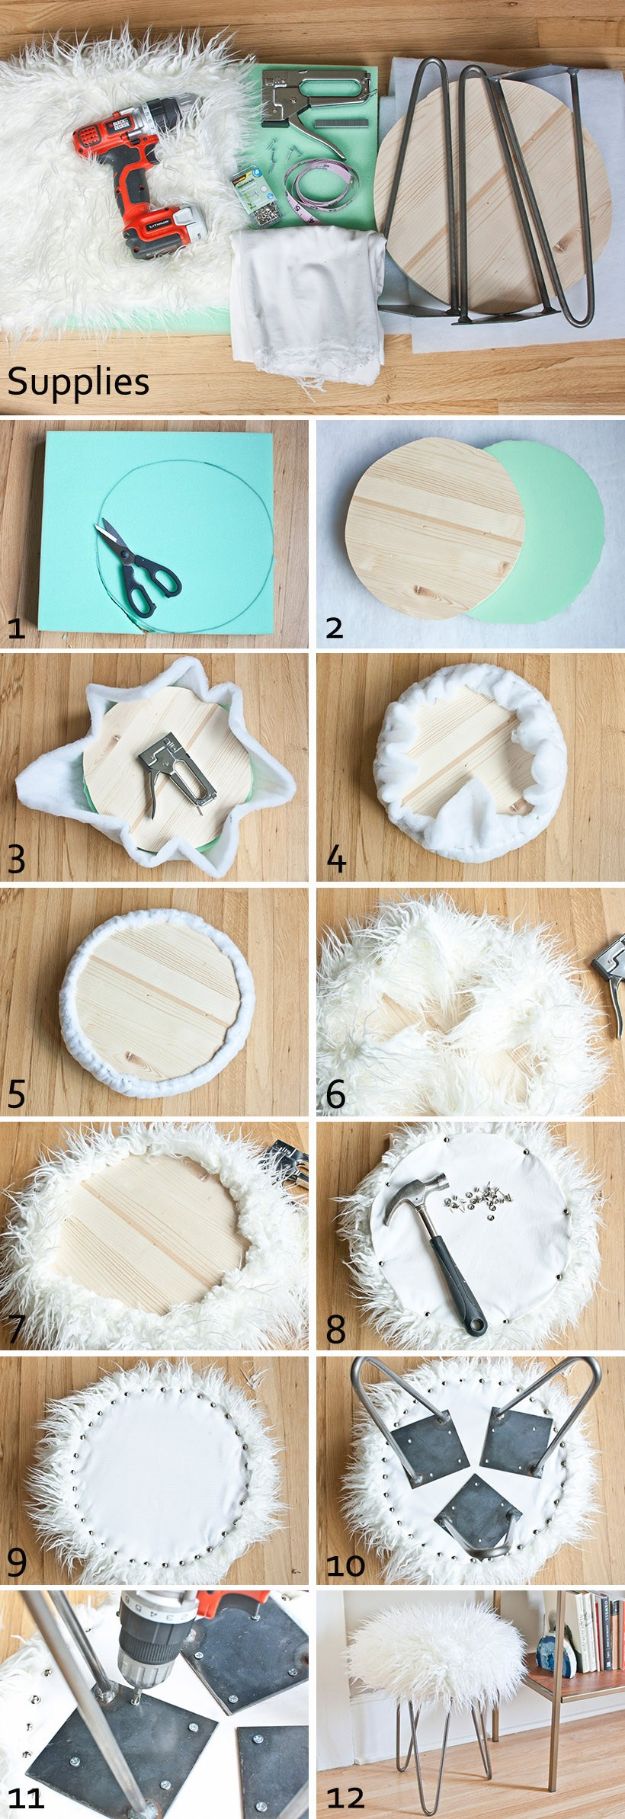 DIY Teen Room Decor Ideas for Girls | Faux Fur Stool with Hairpin Legs | Cool Bedroom Decor, Wall Art & Signs, Crafts, Bedding, Fun Do It Yourself Projects and Room Ideas for Small Spaces #diydecor #teendecor #roomdecor #teens #girlsroom